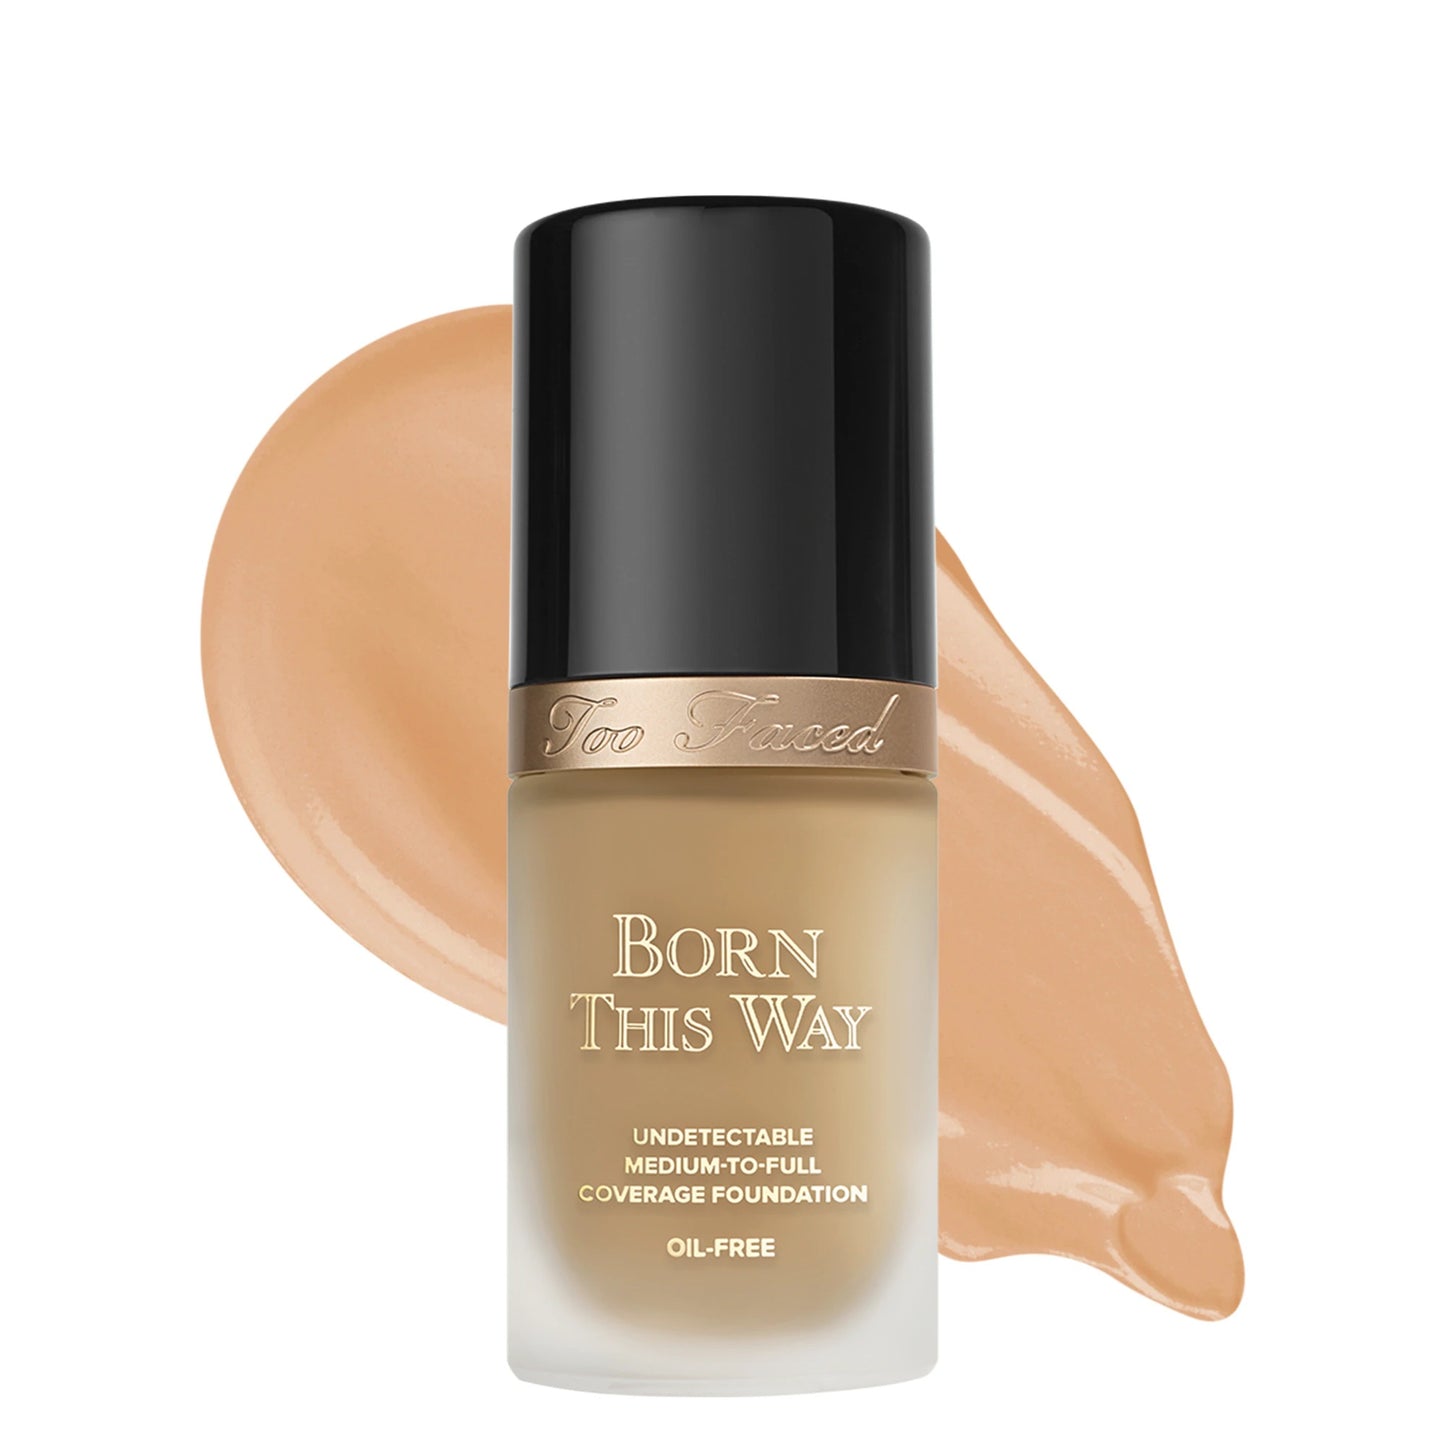 Too Faced Born This Way Foundation 30ml - Light Beige